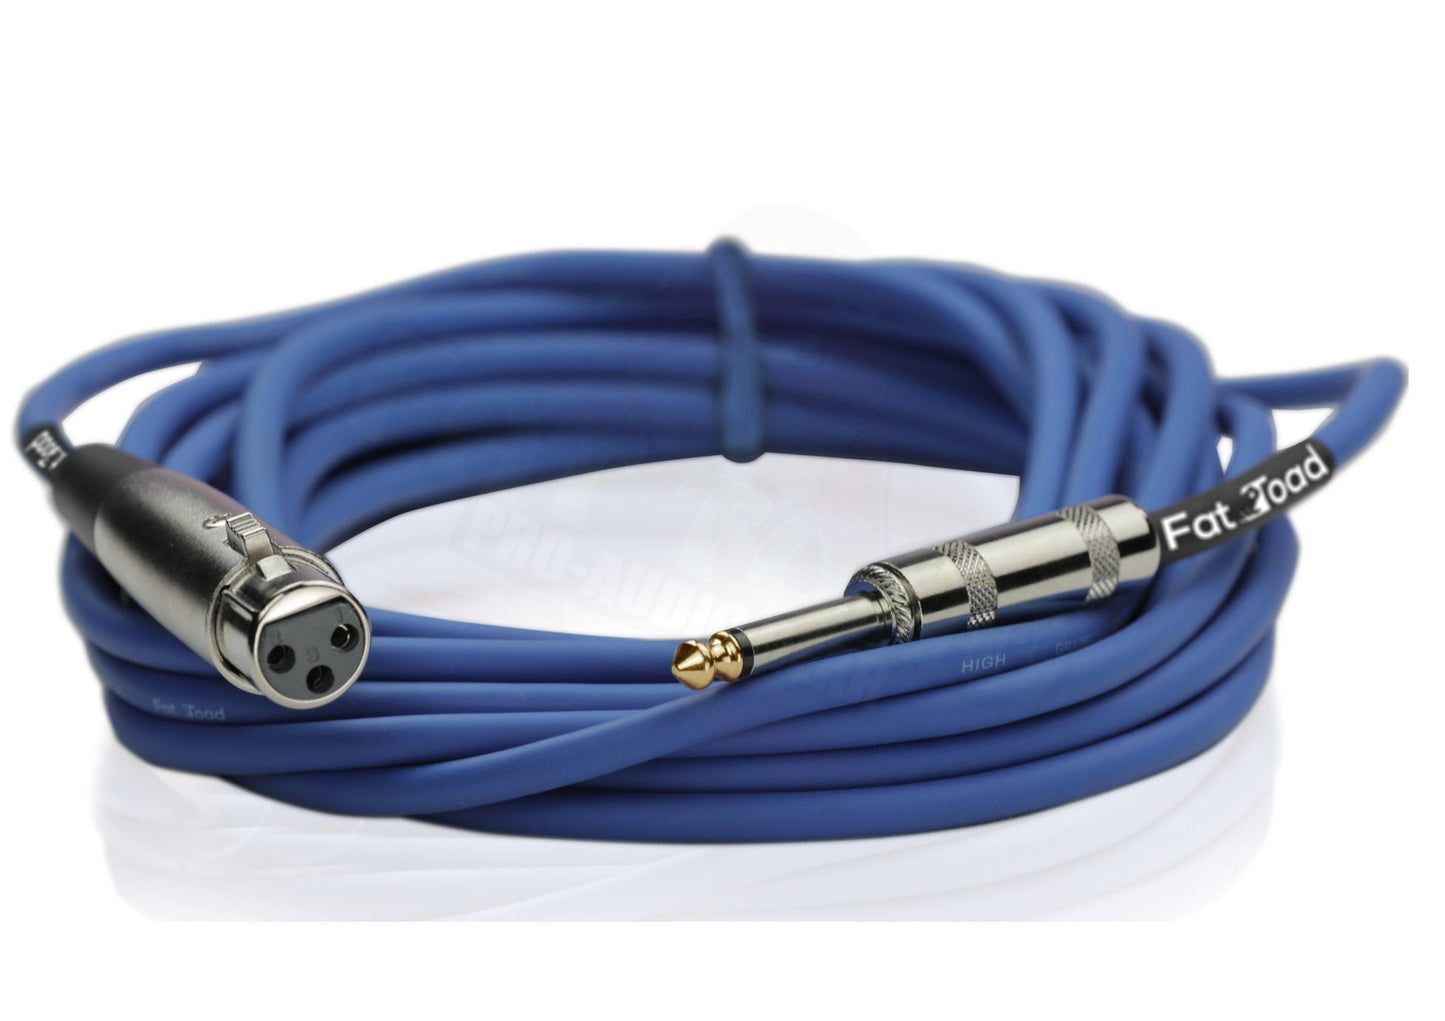 XLR Female to 1/4" Male Jack Microphone Cables (6 Pack) by FAT TOAD- 20ft Professional Pro Audio Mic Blue Cord Patch Lo-Z Connector, 24 Gauge Shielded